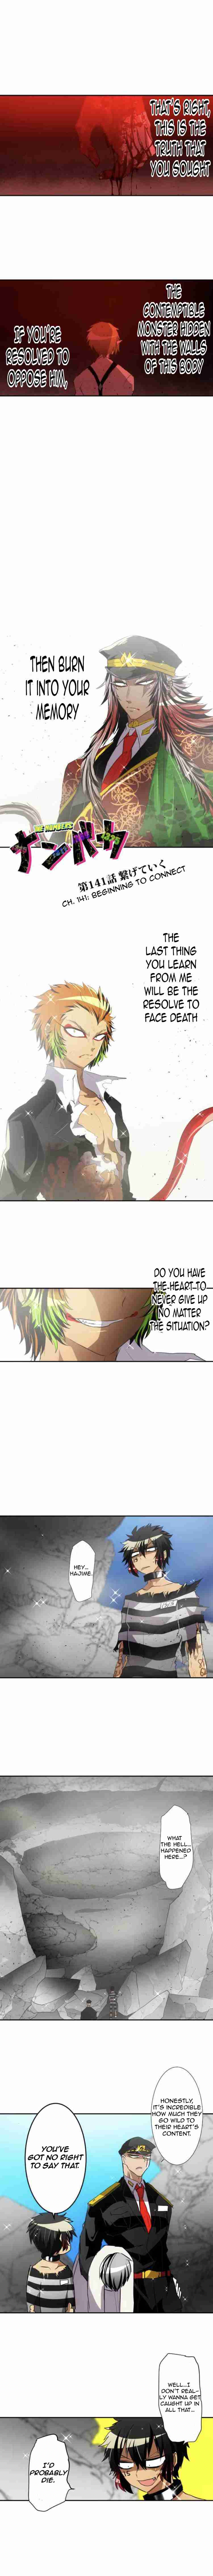 Nanbaka Ch. 141 Beginning to Connect